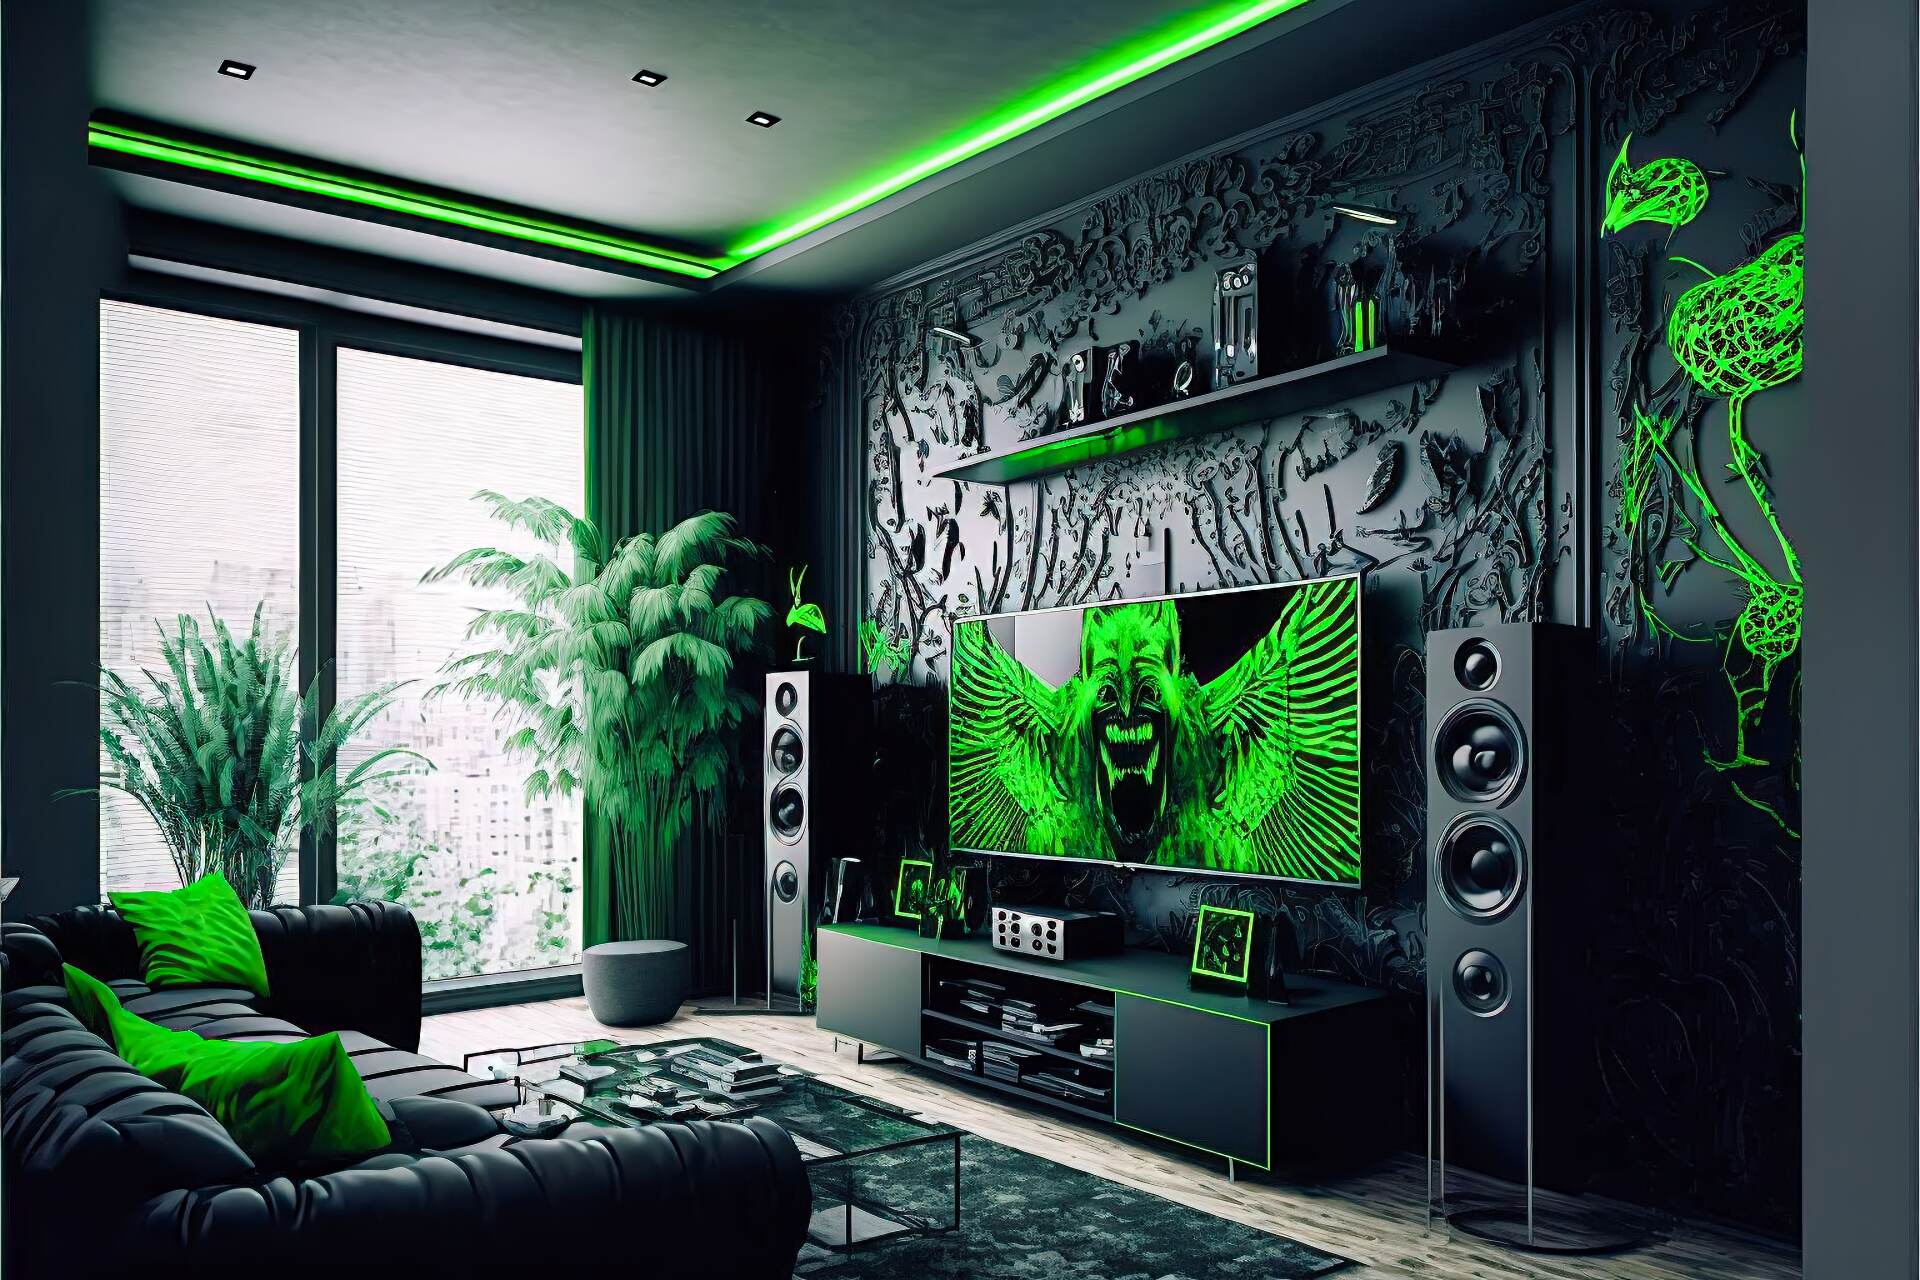 A Cyberpunk-Style Living Room With A Neon Jungle Vibe. The Walls Are Painted Black And Adorned With Neon Lights In Various Shades Of Green. The Furniture Is Made Up Of Sleek And Modern Pieces In A Monochromatic Color Scheme Of Black And White. A Large Flat Screen Tv Is Mounted On The Wall, Surrounded By More Neon Lights. A High-Tech Sound System And A Futuristic Gaming Console Complete The Look.